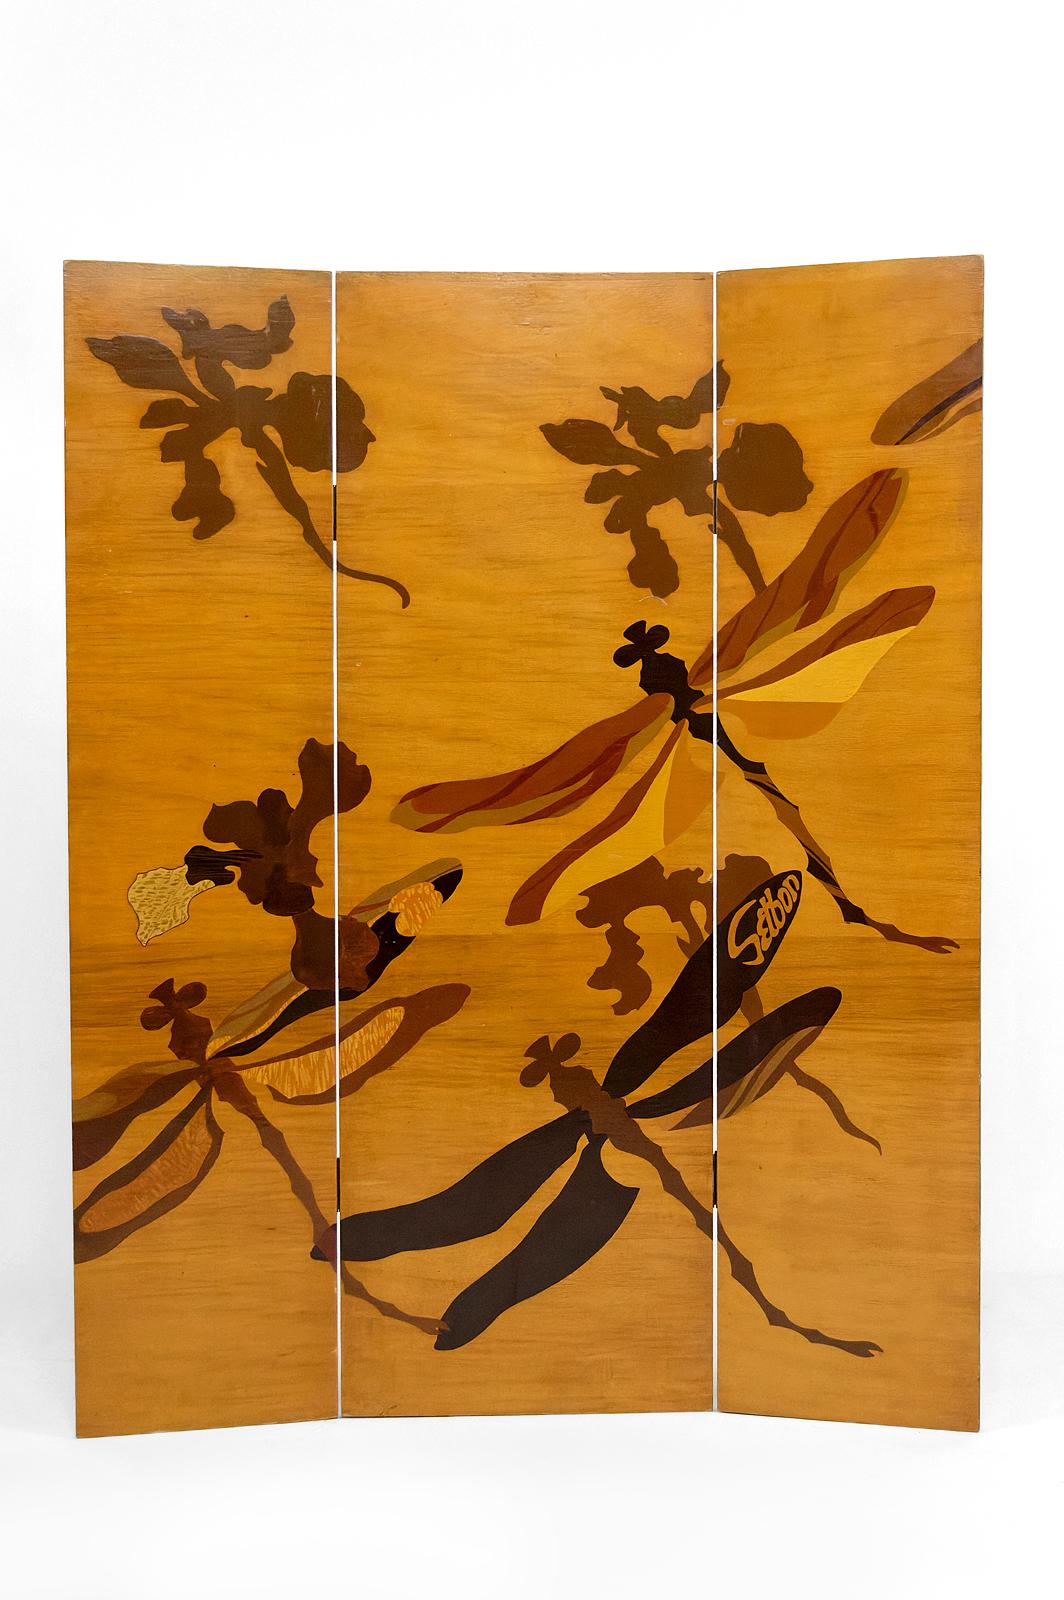 Beautiful wooden folding screen painted in imitation of marquetry.
Inspired by the work of Emile Gallé.
Signed Setbon.
France, Circa 1910.

Good condition, small traces of use.

Dimensions:
Height:110cm
Width:87cm
Depth:4cm